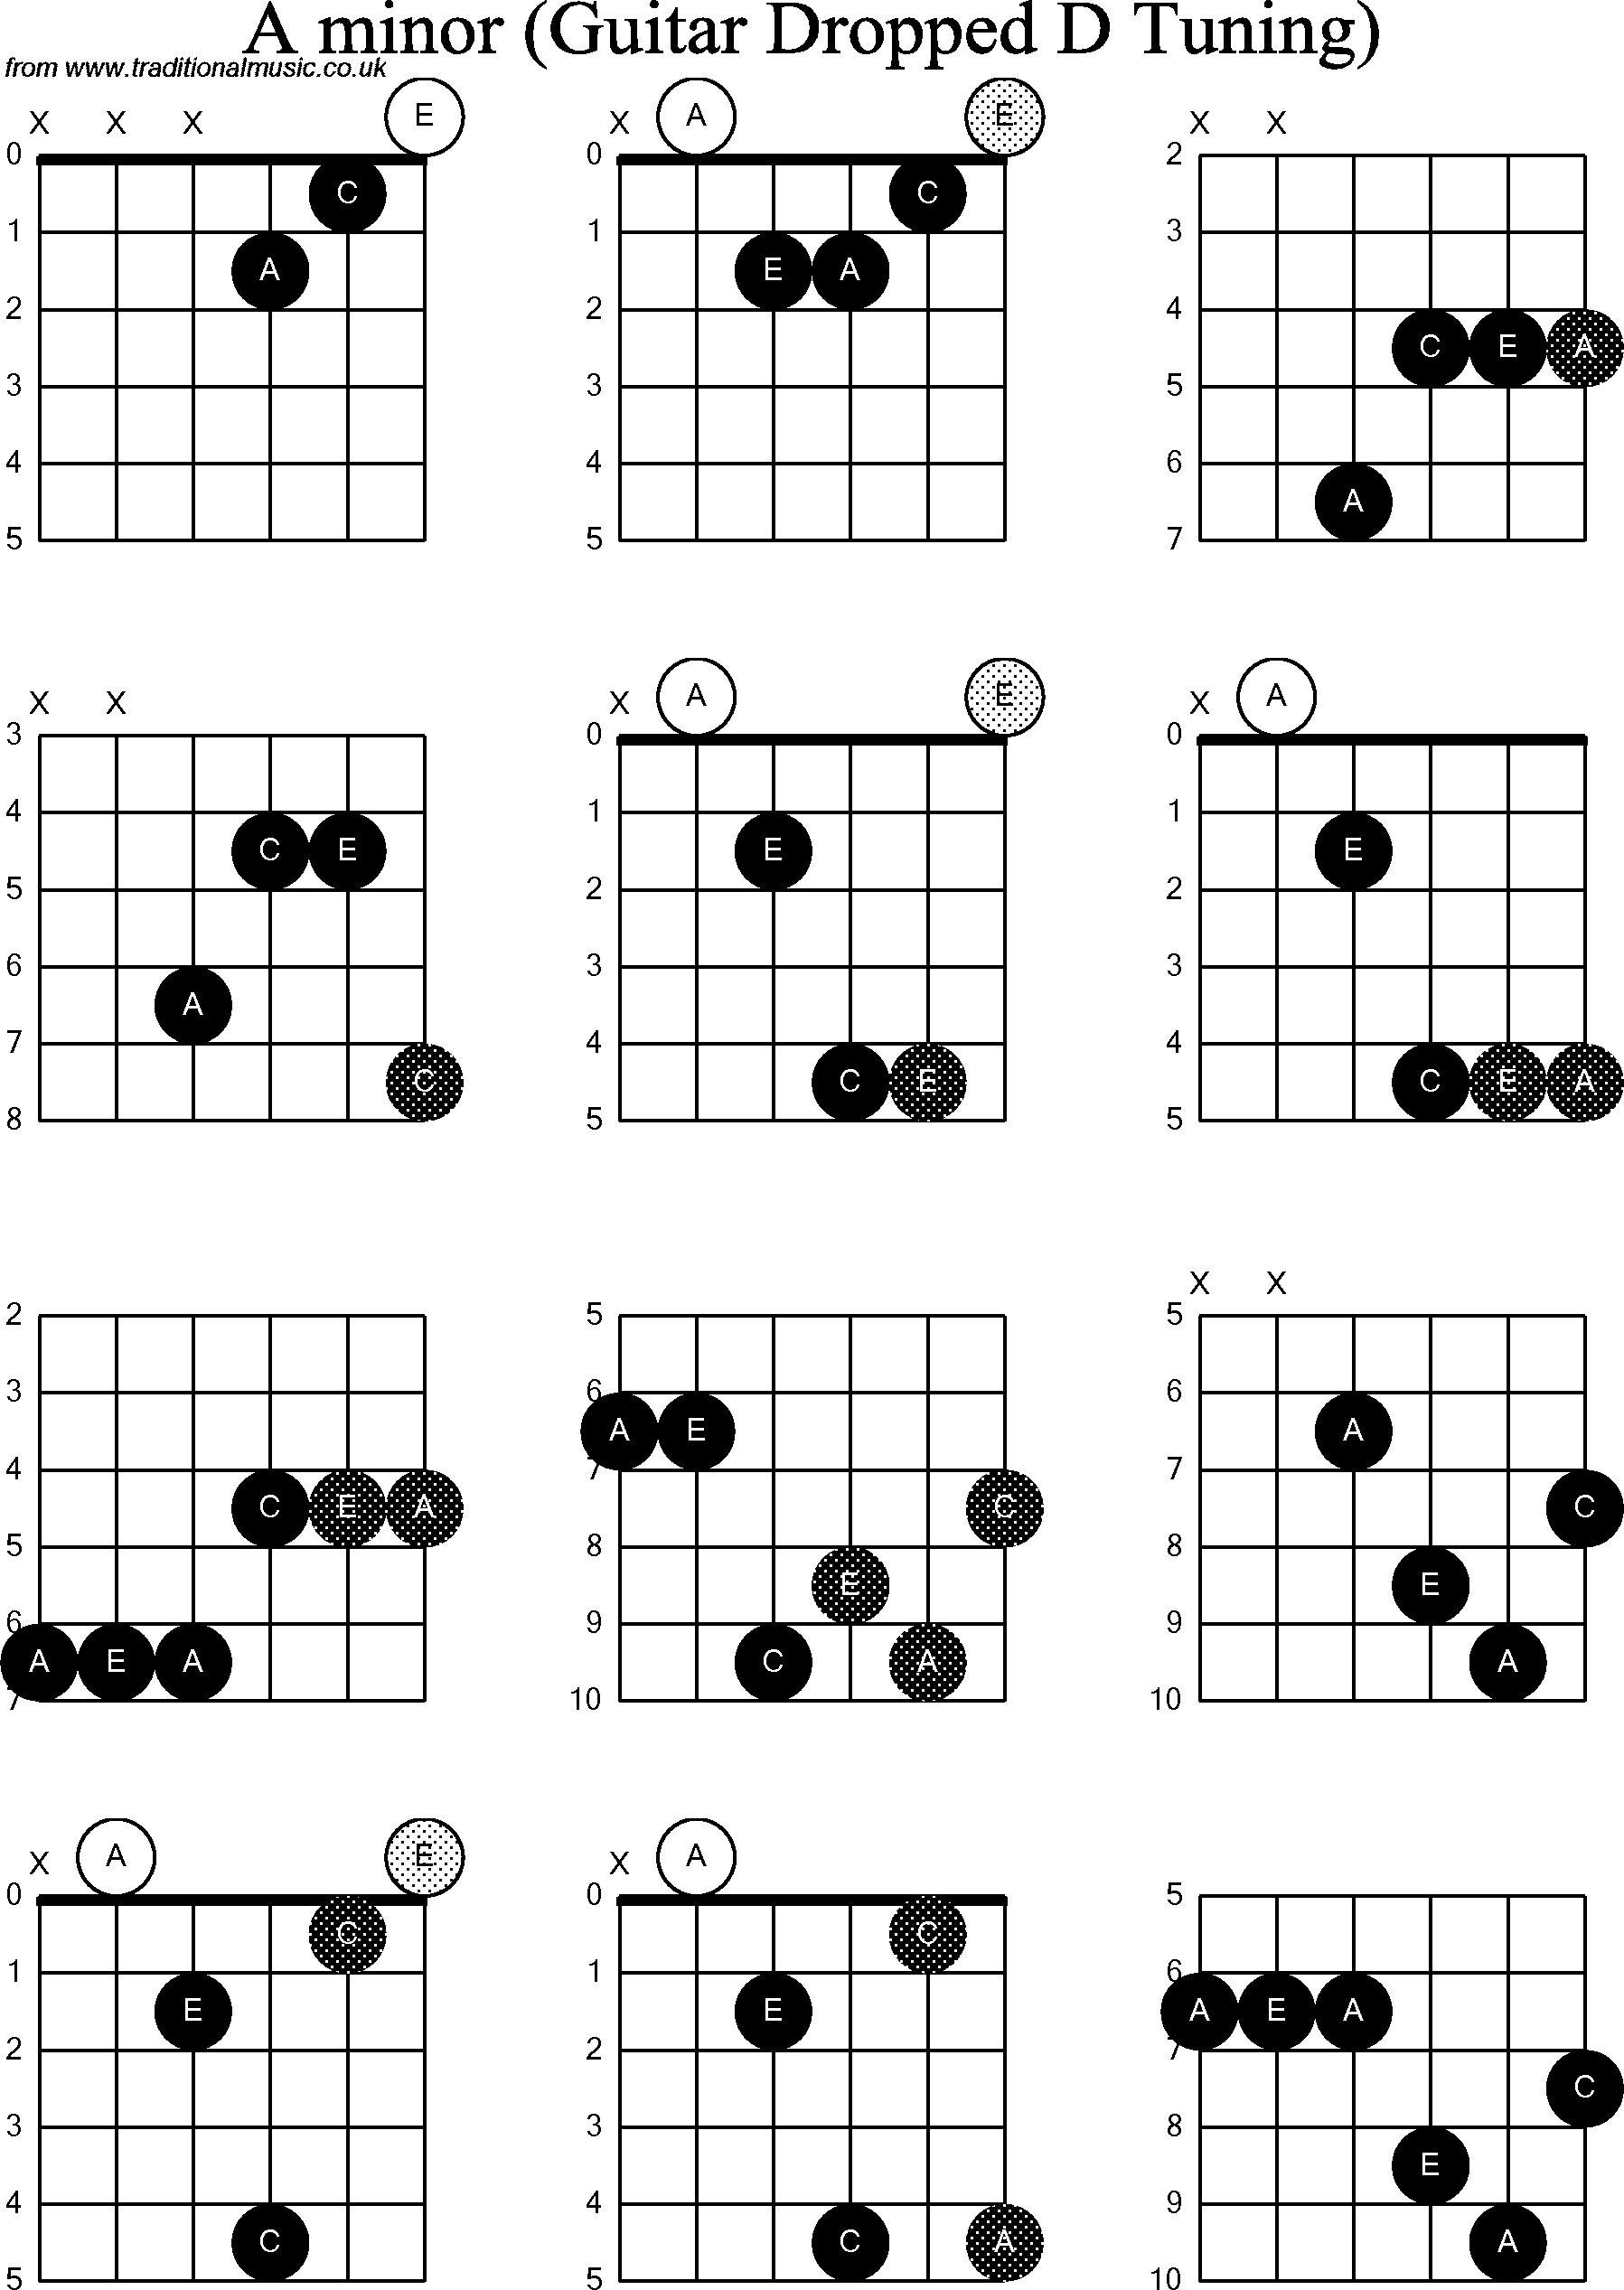 A Minor Chord Chord Diagrams For Dropped D Guitardadgbe A Minor